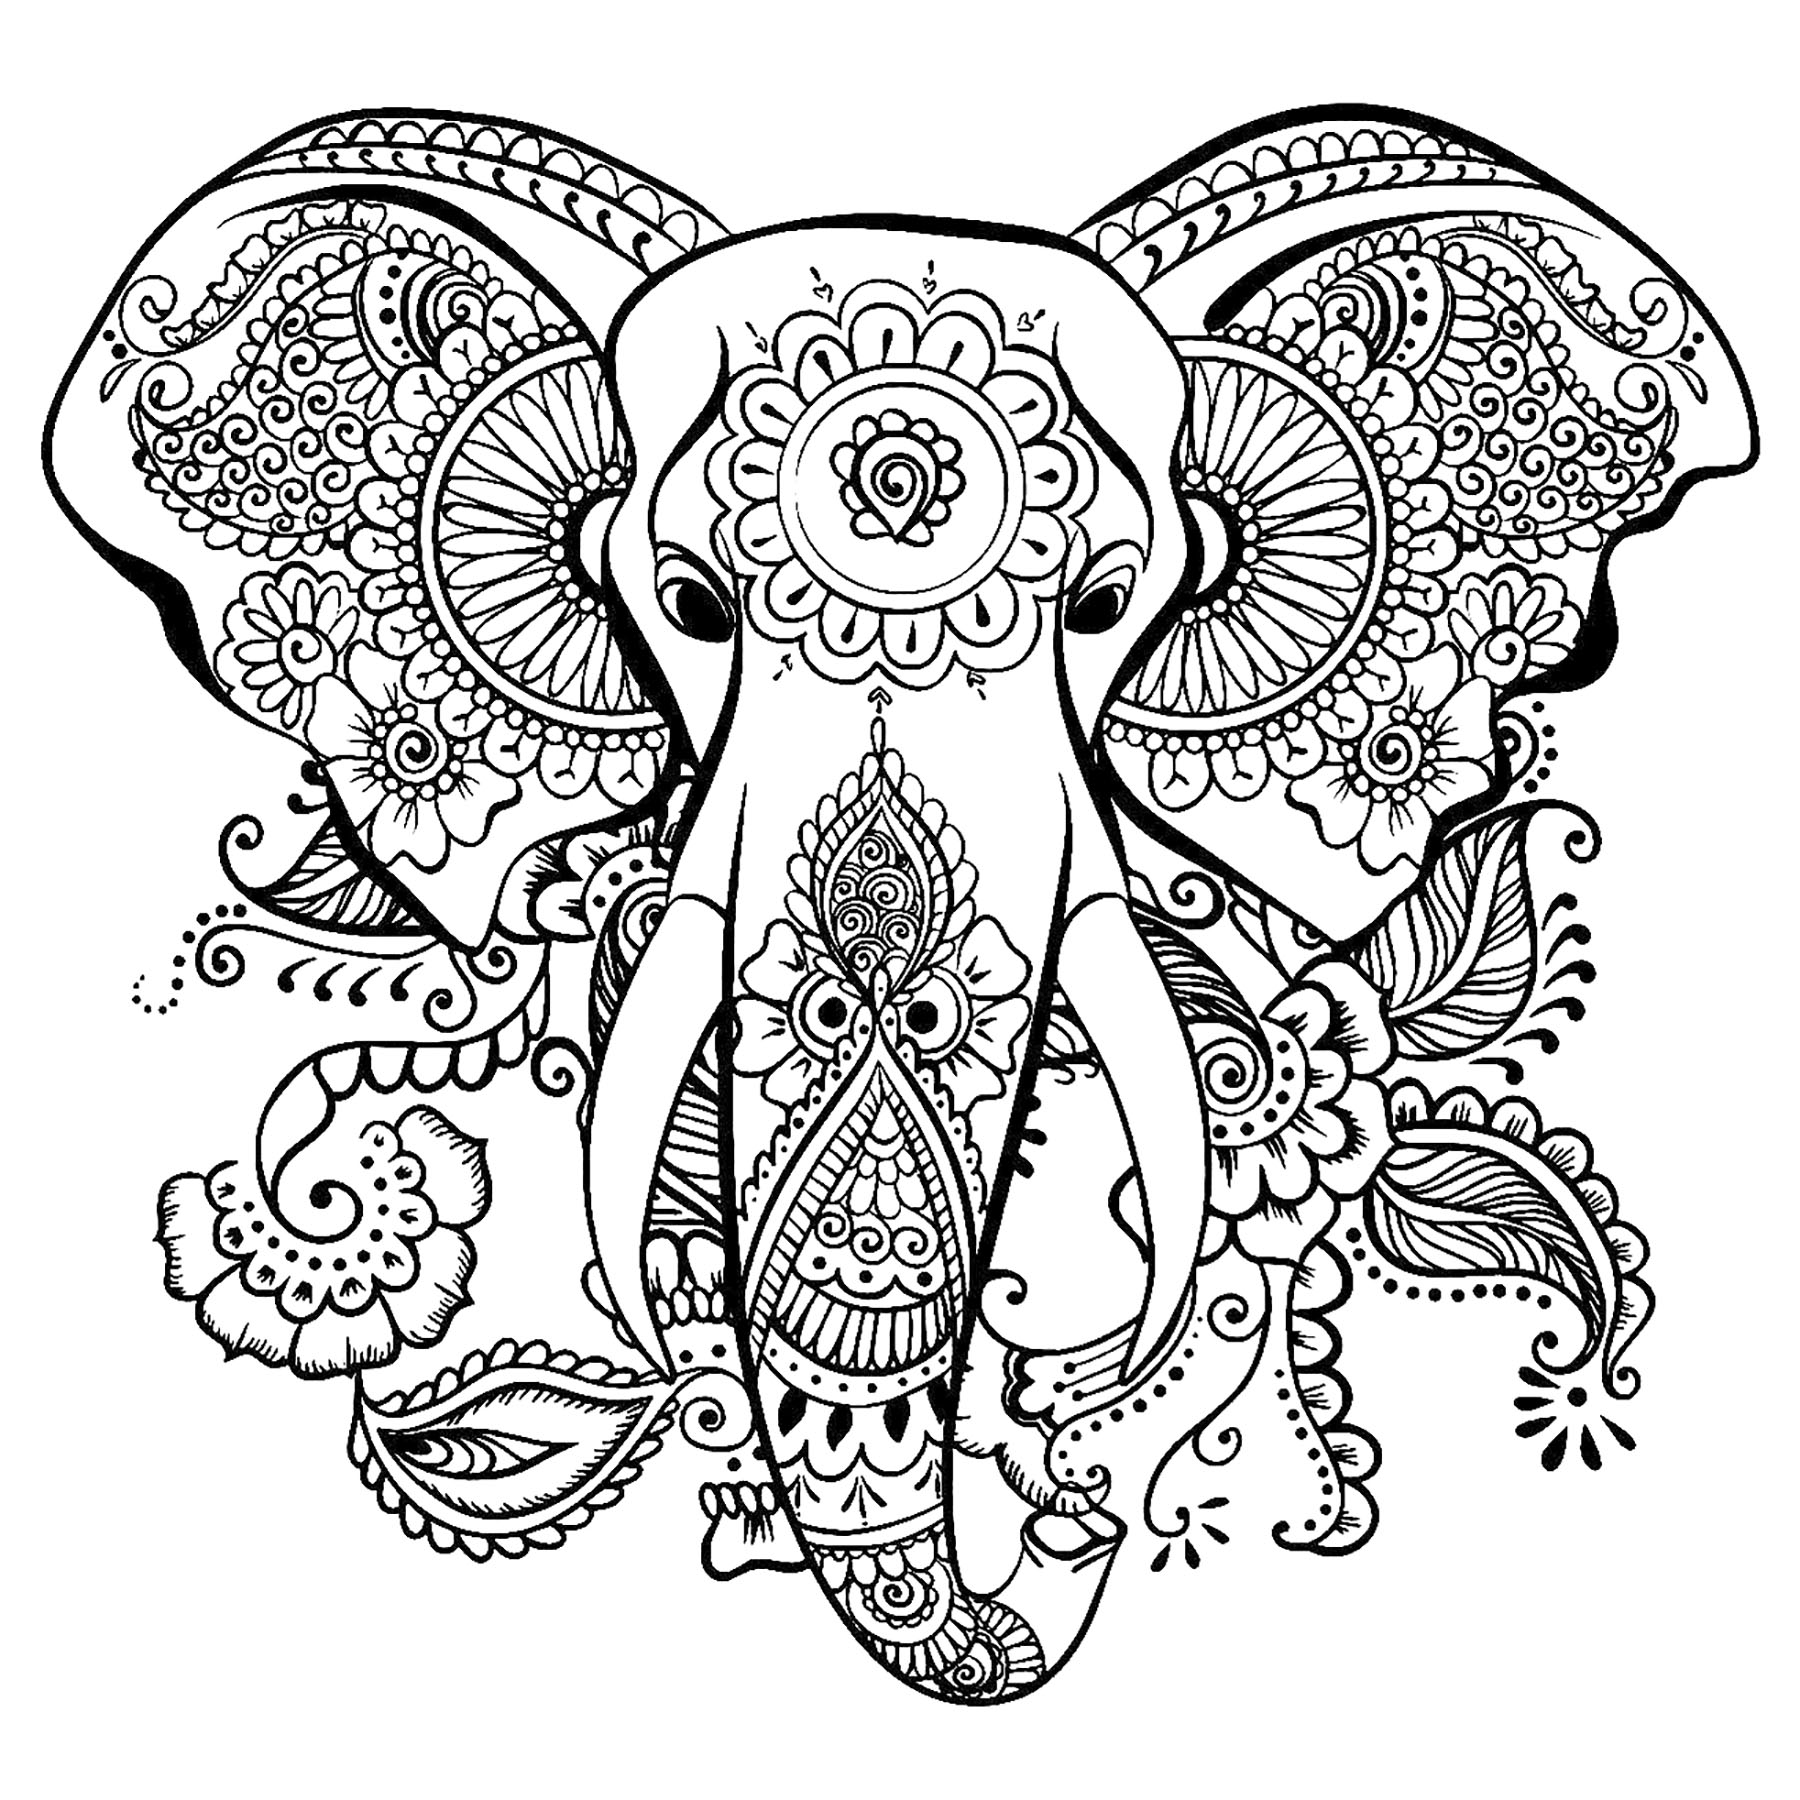 Elephant head to color, with beautiful patterns